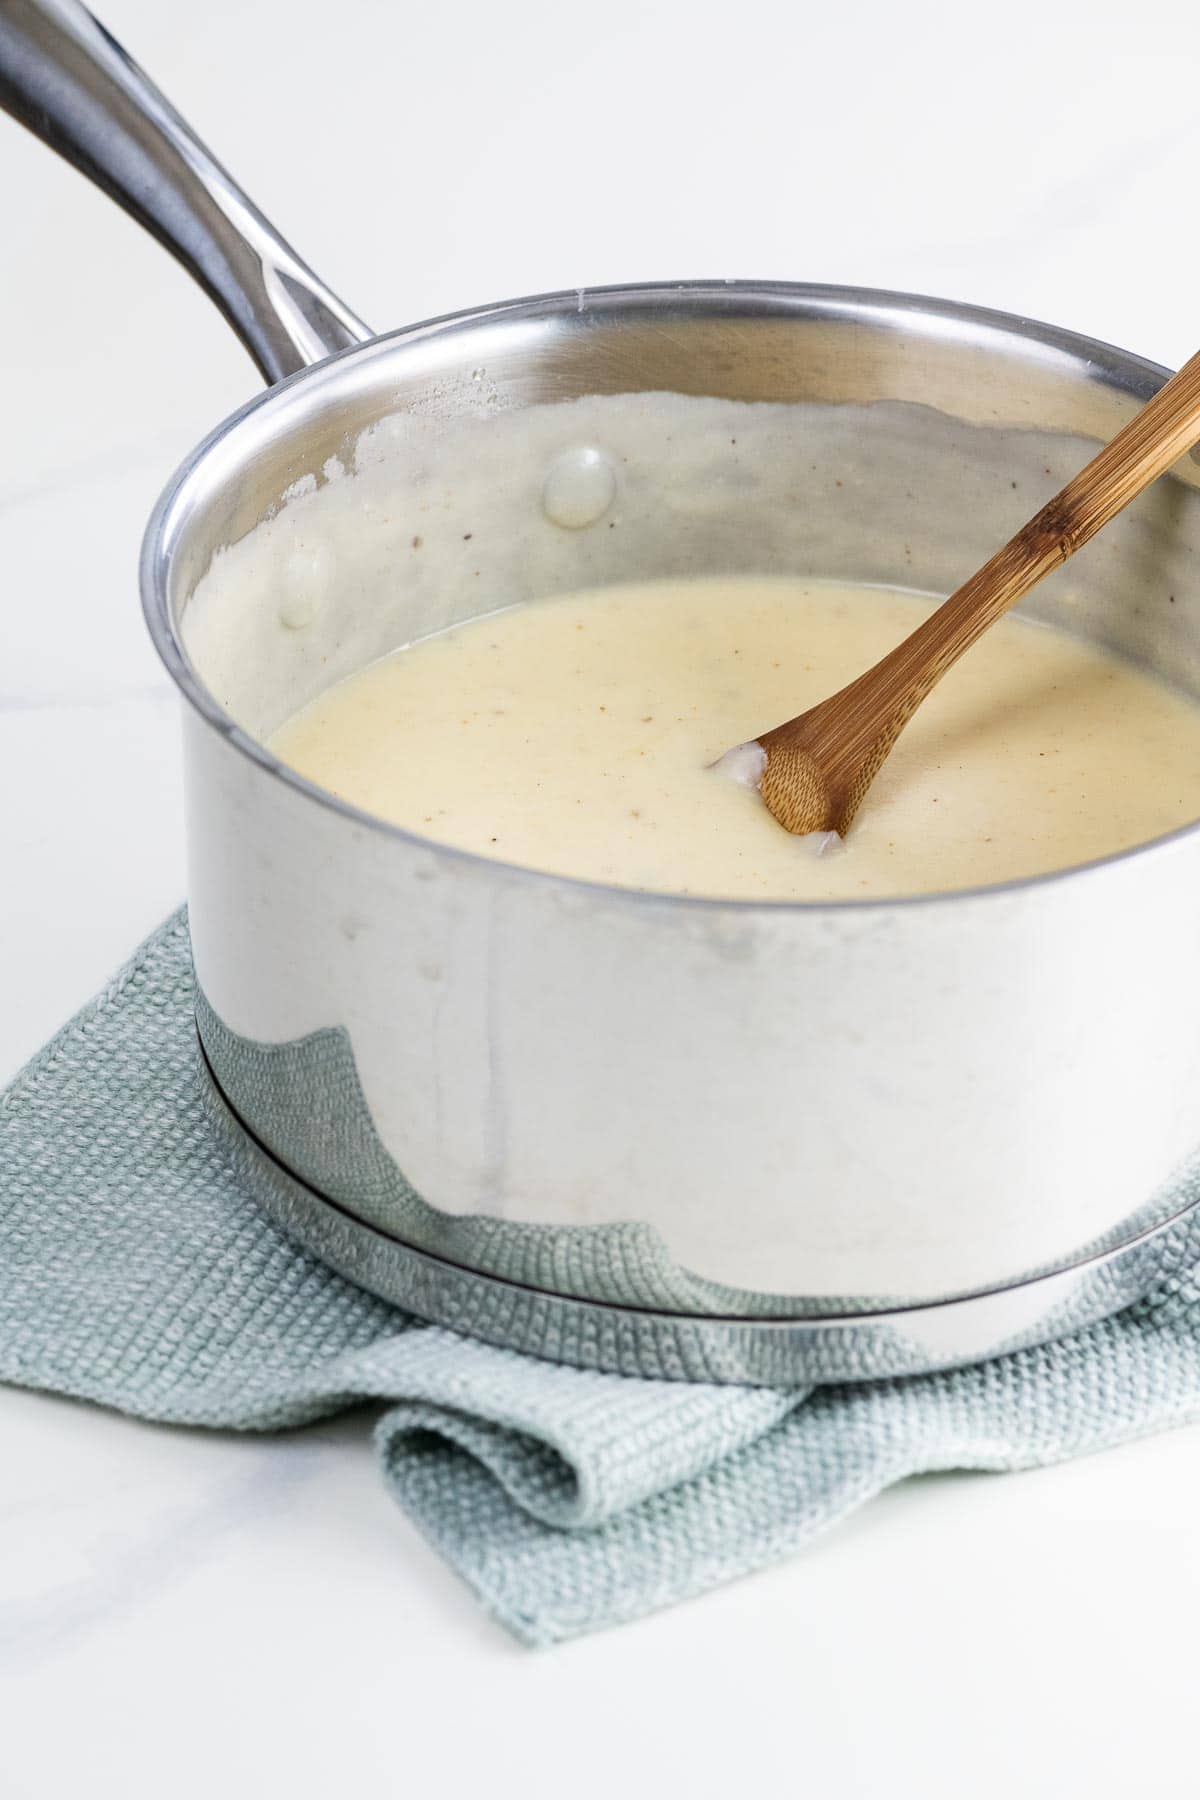 mornay sauce recipe in a pot with a wooden spoon